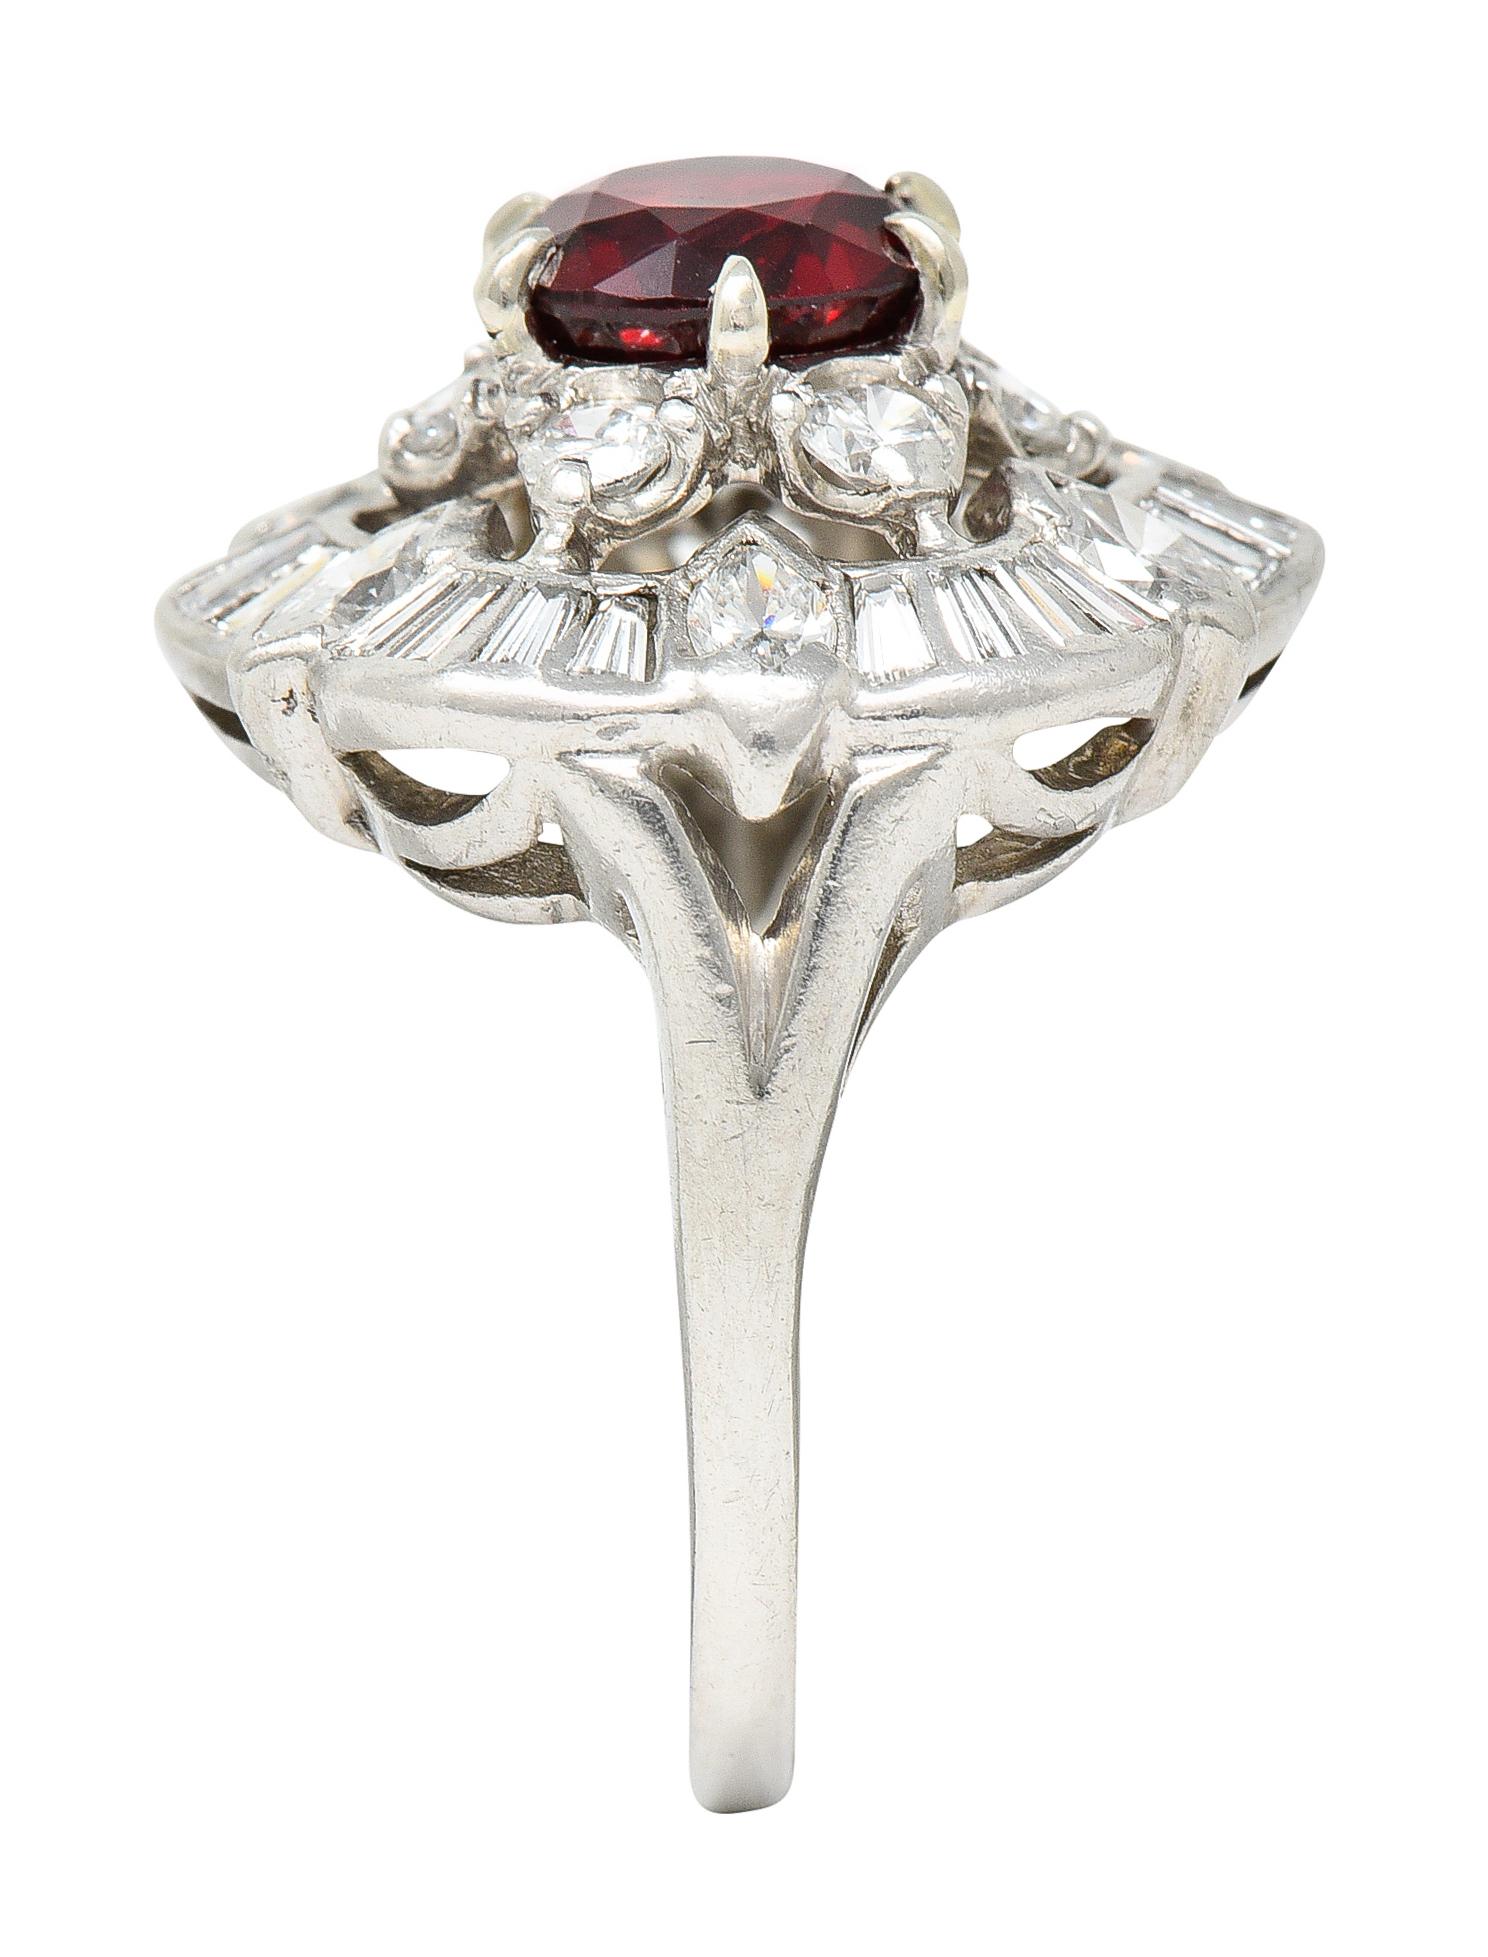 1950's Mid-Century 2.77 Carats Red Spinel Diamond Platinum Cluster Cocktail Ring For Sale 7